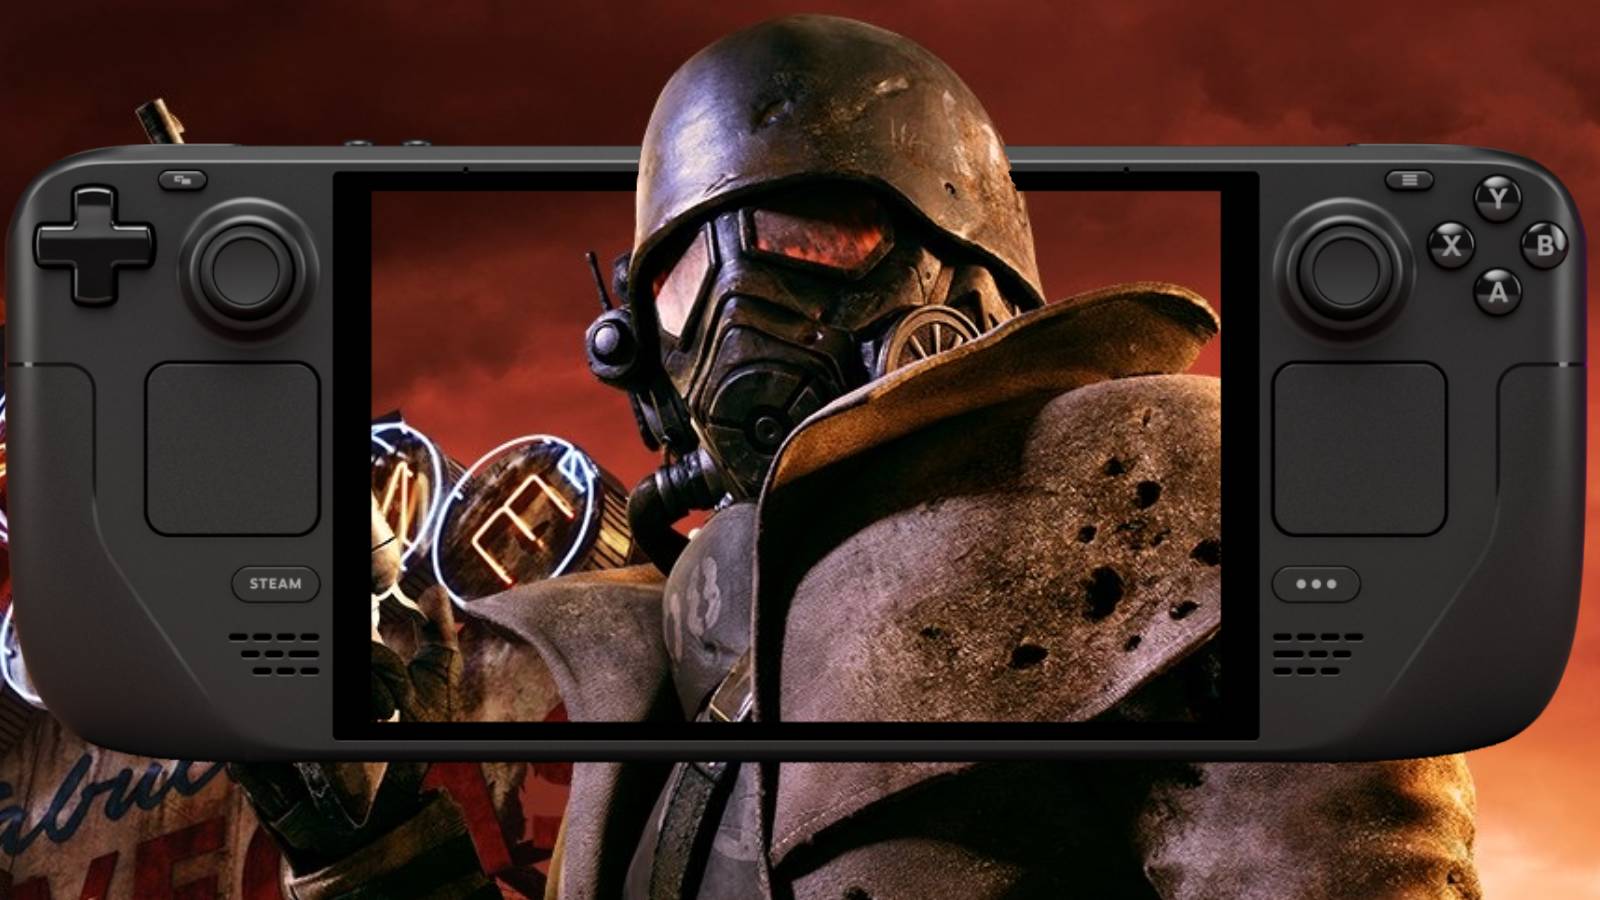 Key-art from Fallout New Vegas on the screen of a Steam Deck.